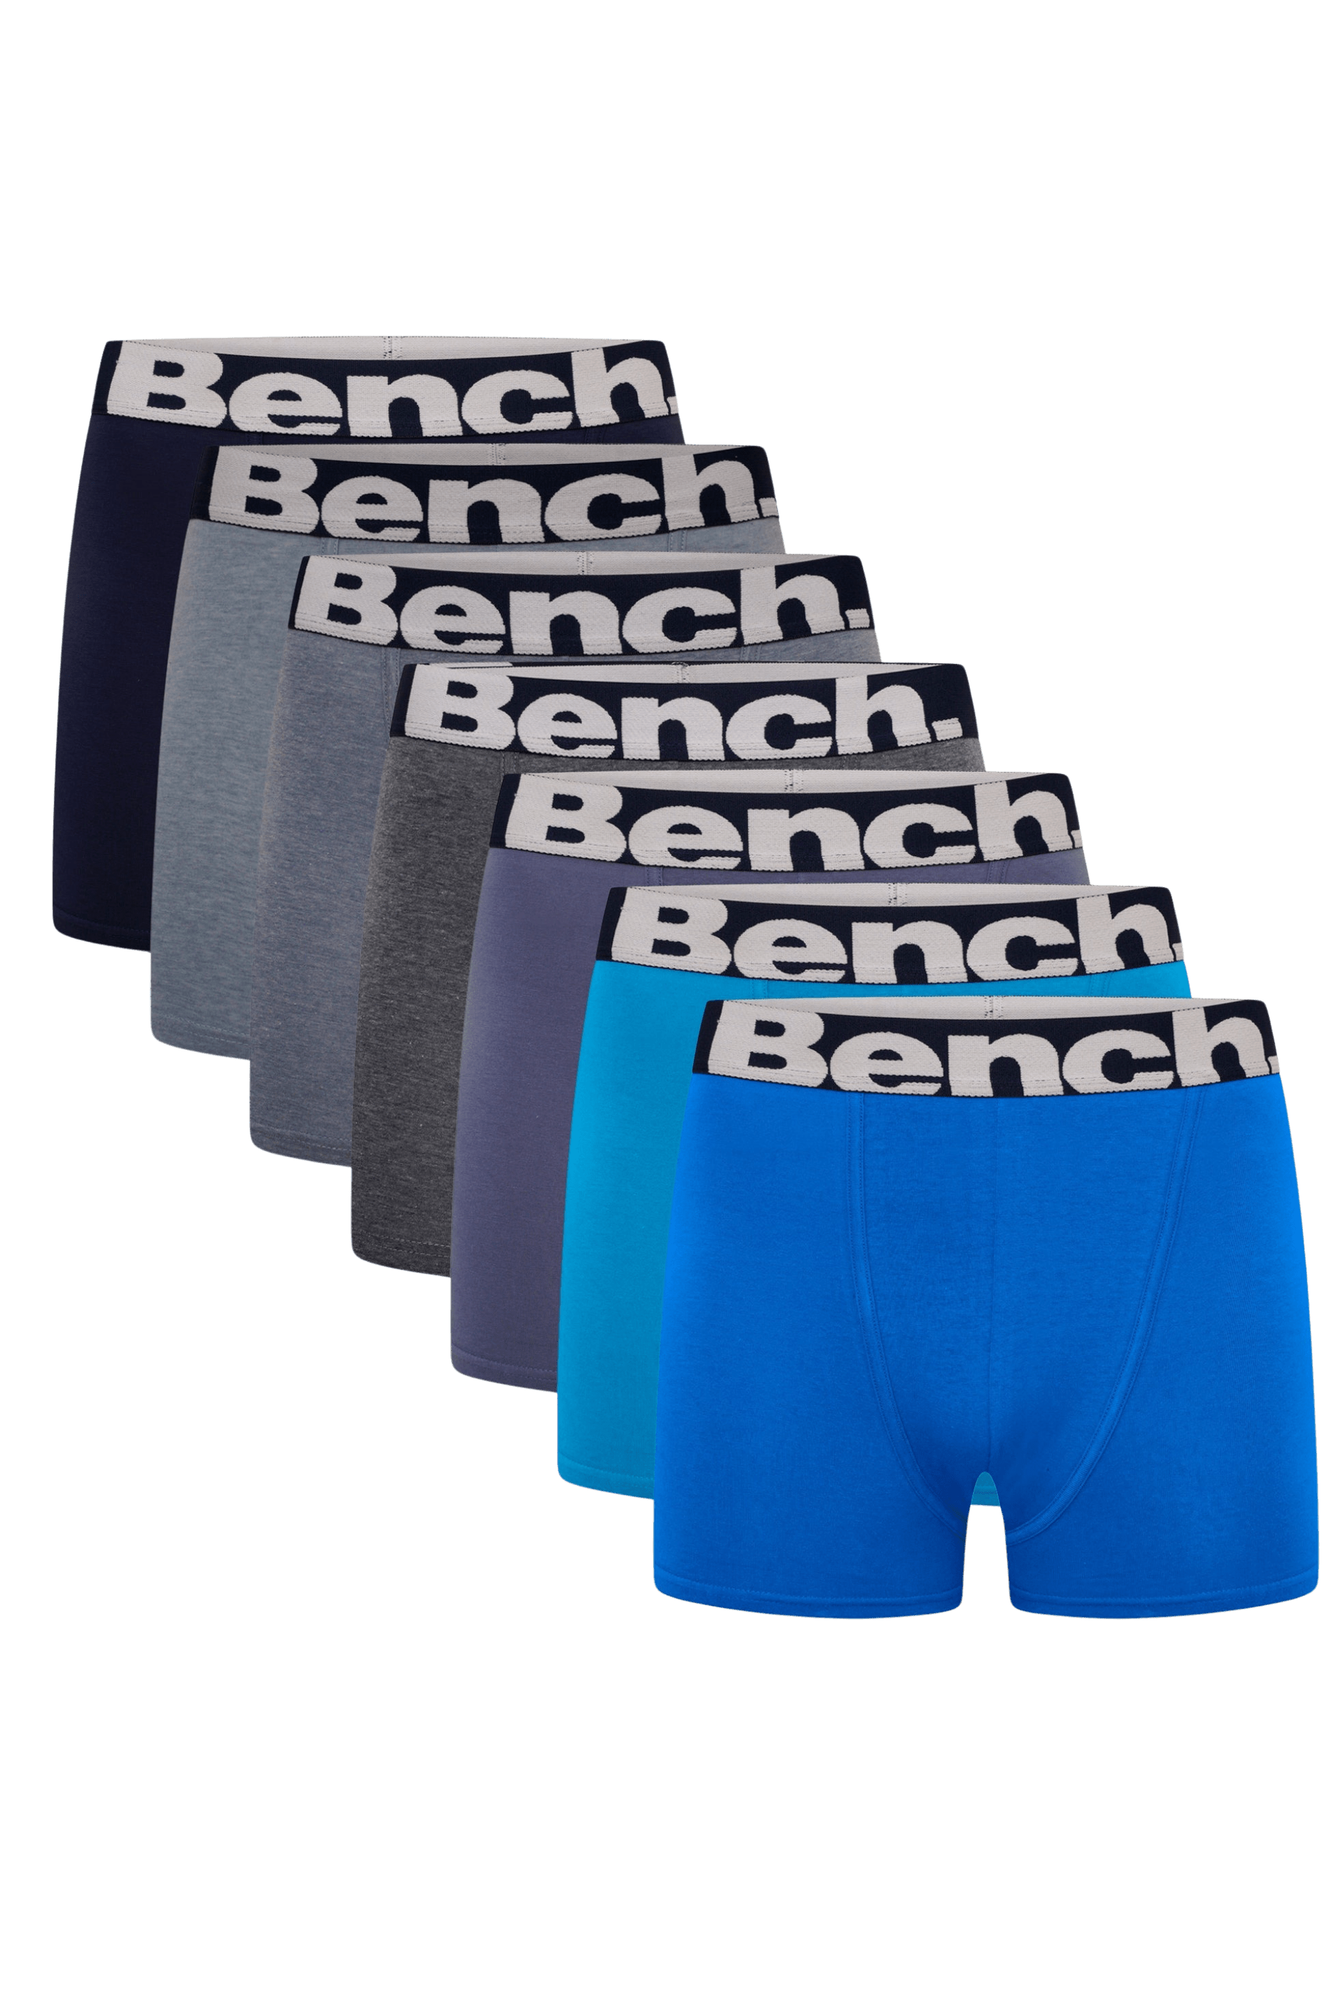 Bench Mens Dolby 3 Pack Elasticated Underwear Boxers Boxer Shorts -  Assorted 